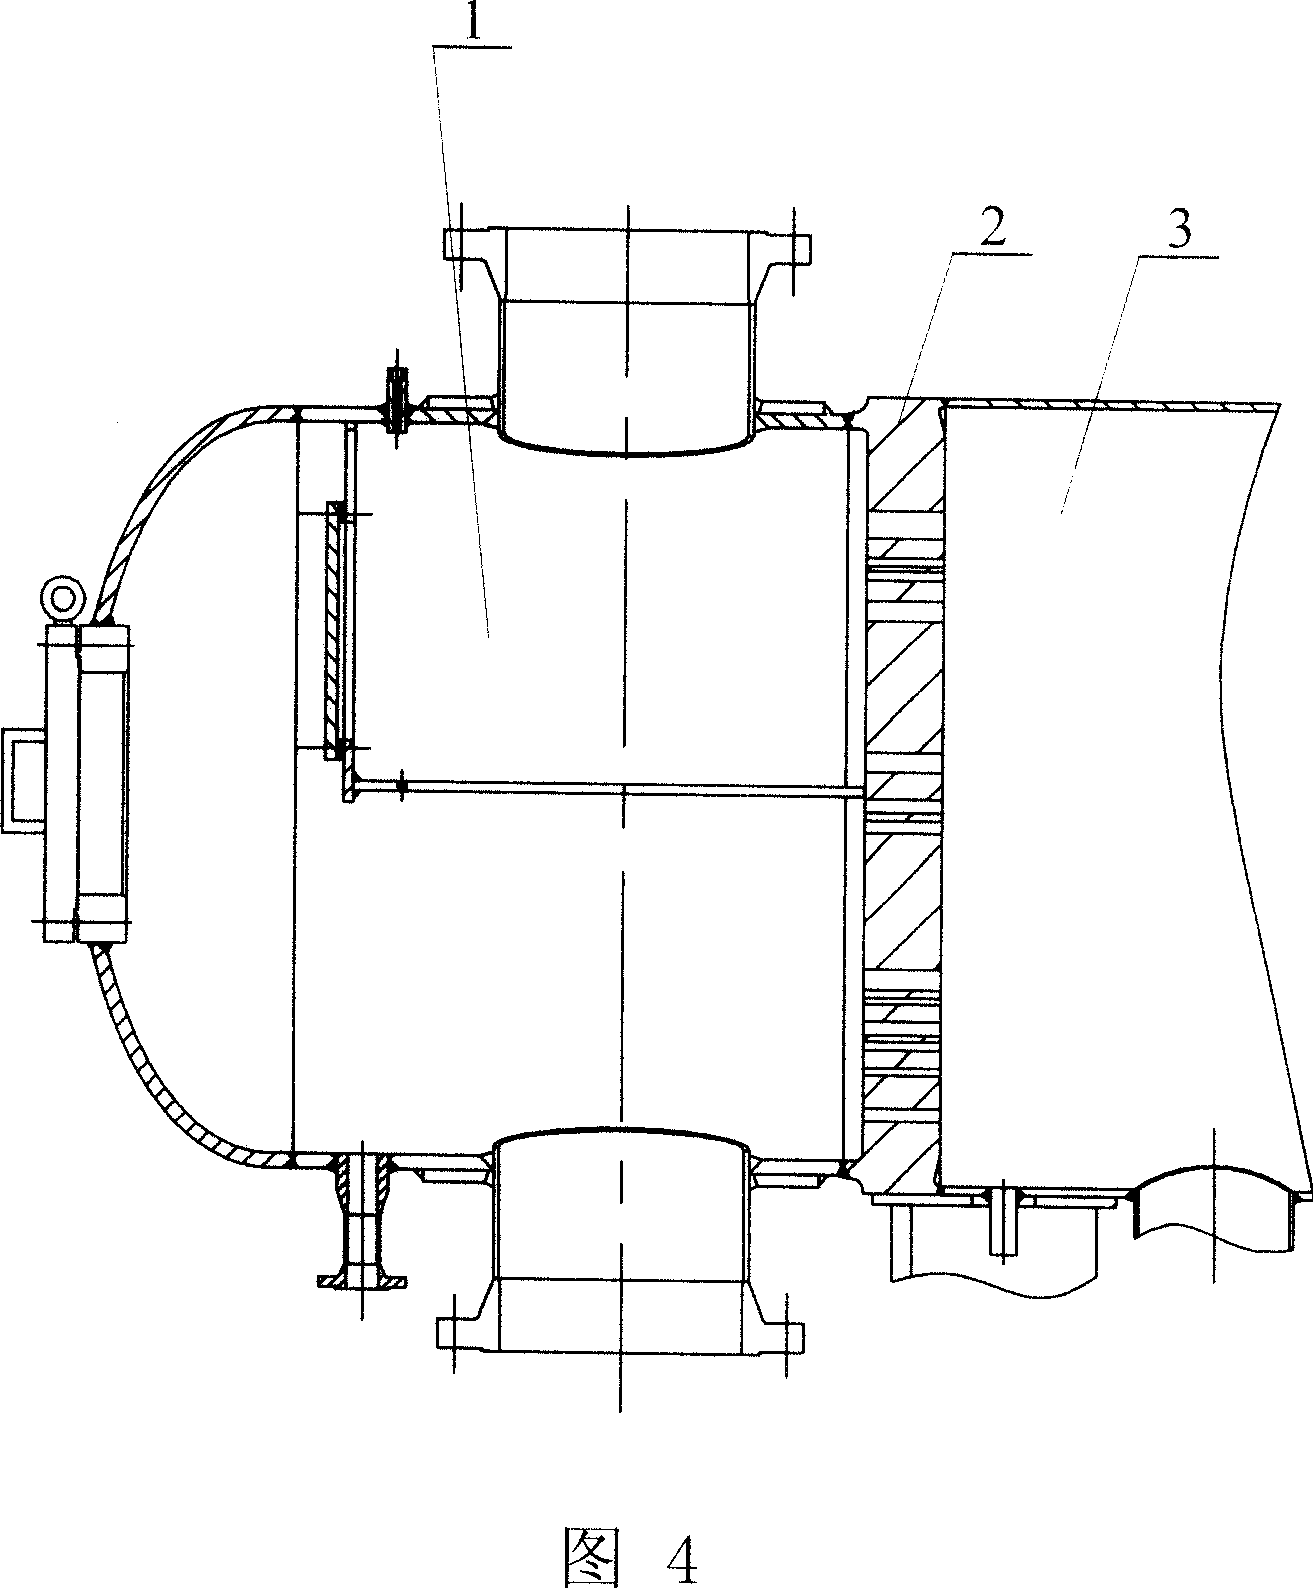 Pile-up welding method of turbine low pressure heater pipe plate and shell, water chamber junction